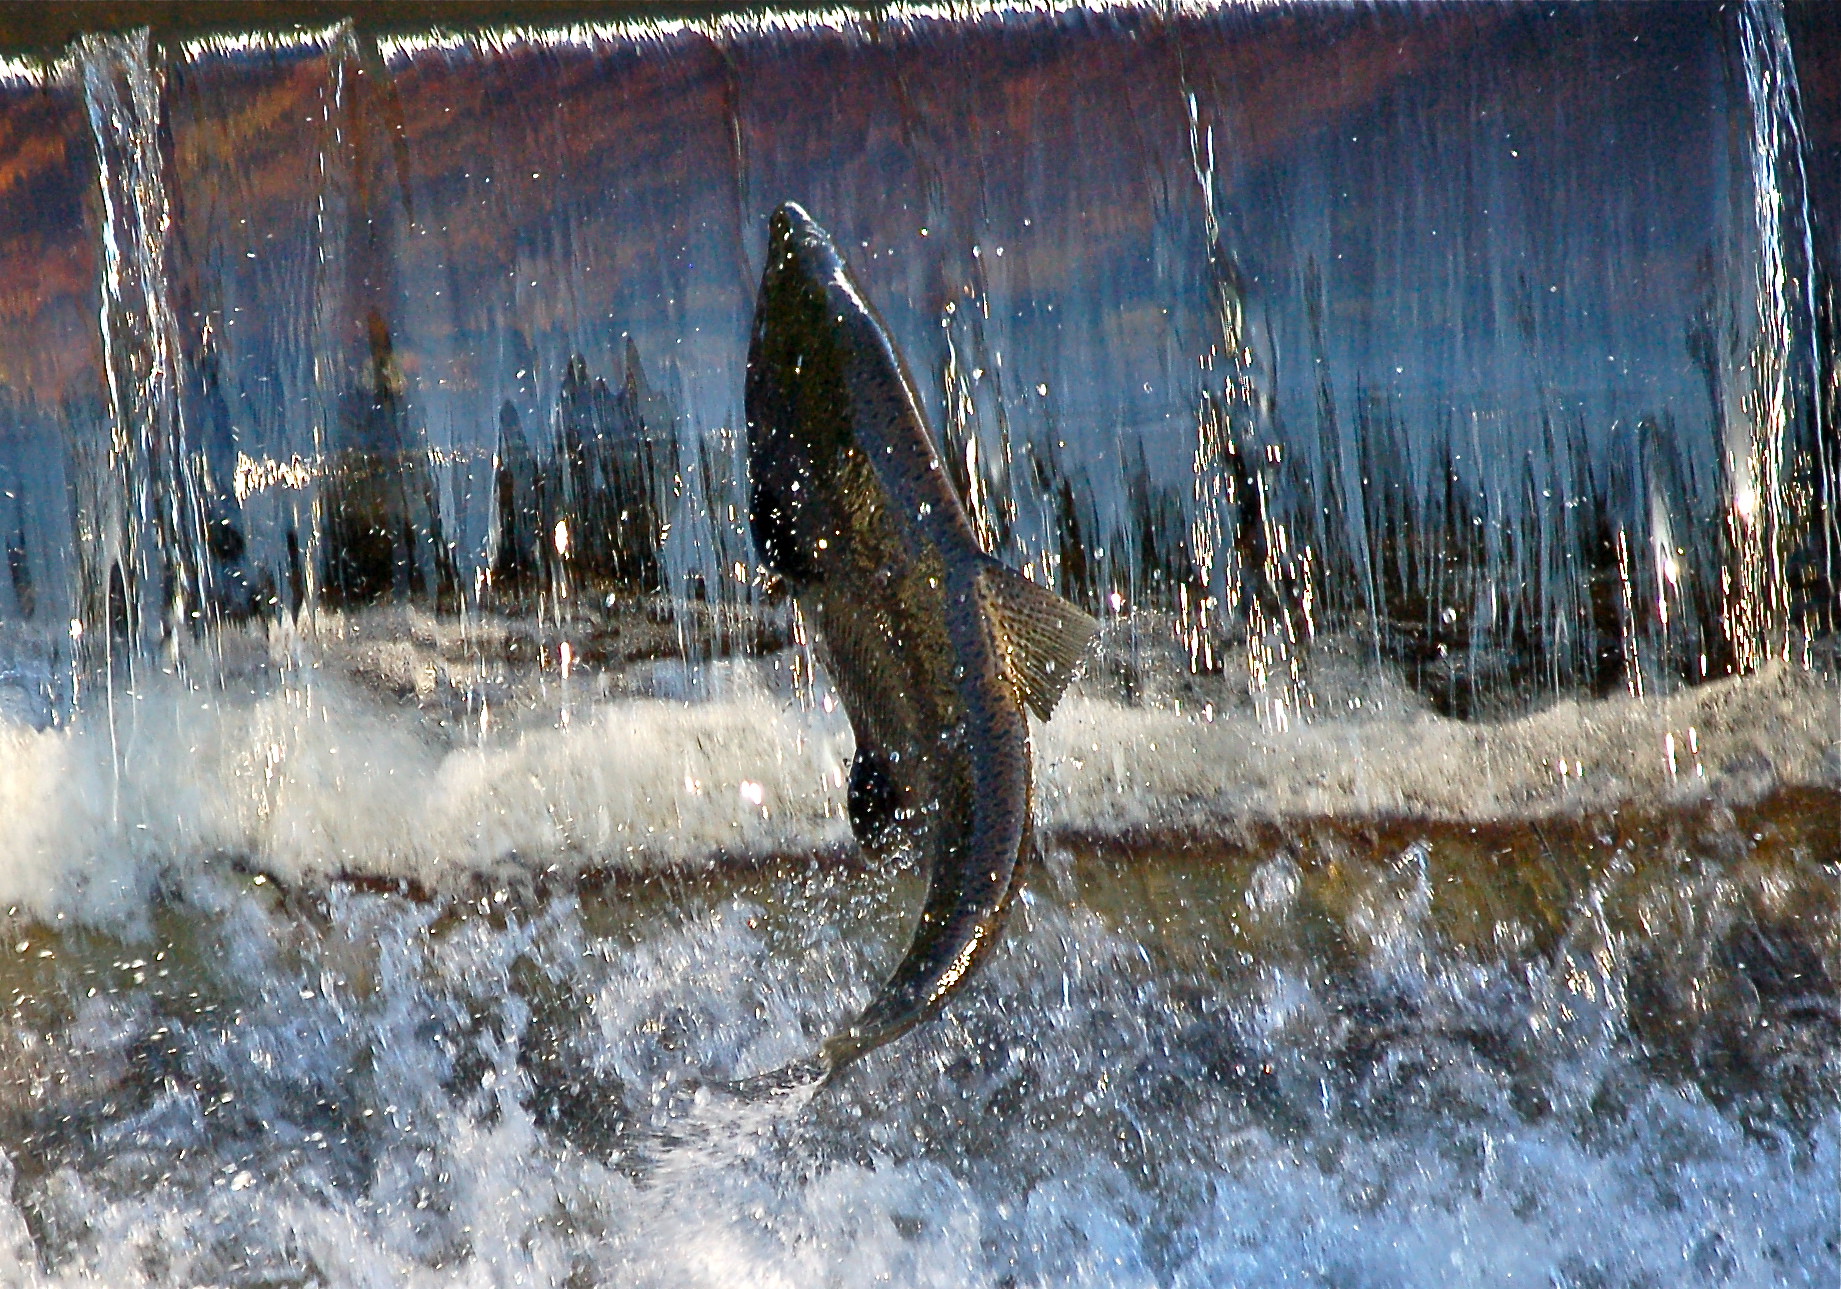 Issaquah Salmon Hatchery with a Salmon swimming up the fish ladder.